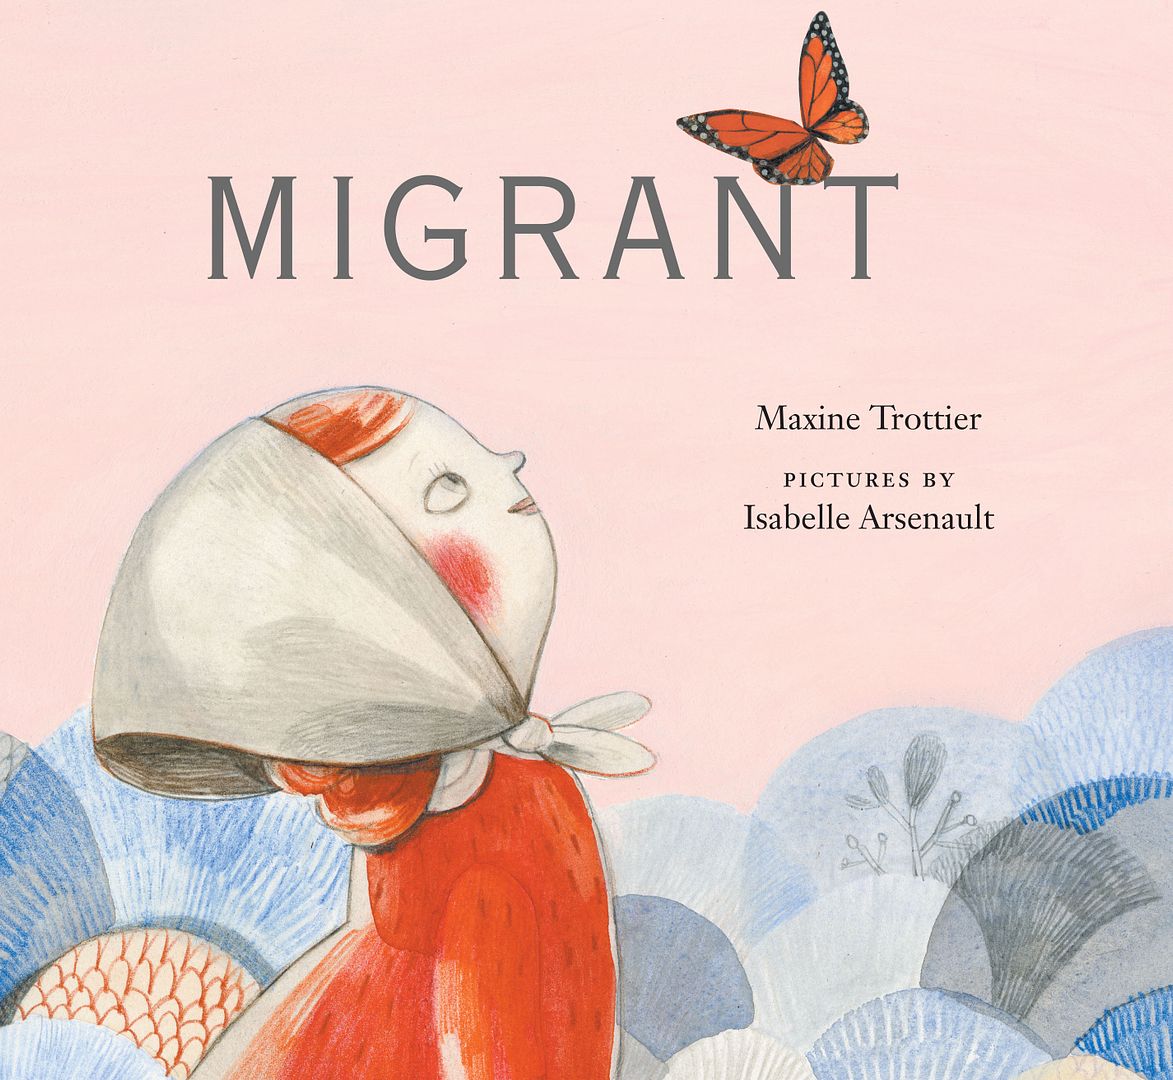 Children's books about the immigration experience Migrant by Maxine Trottier